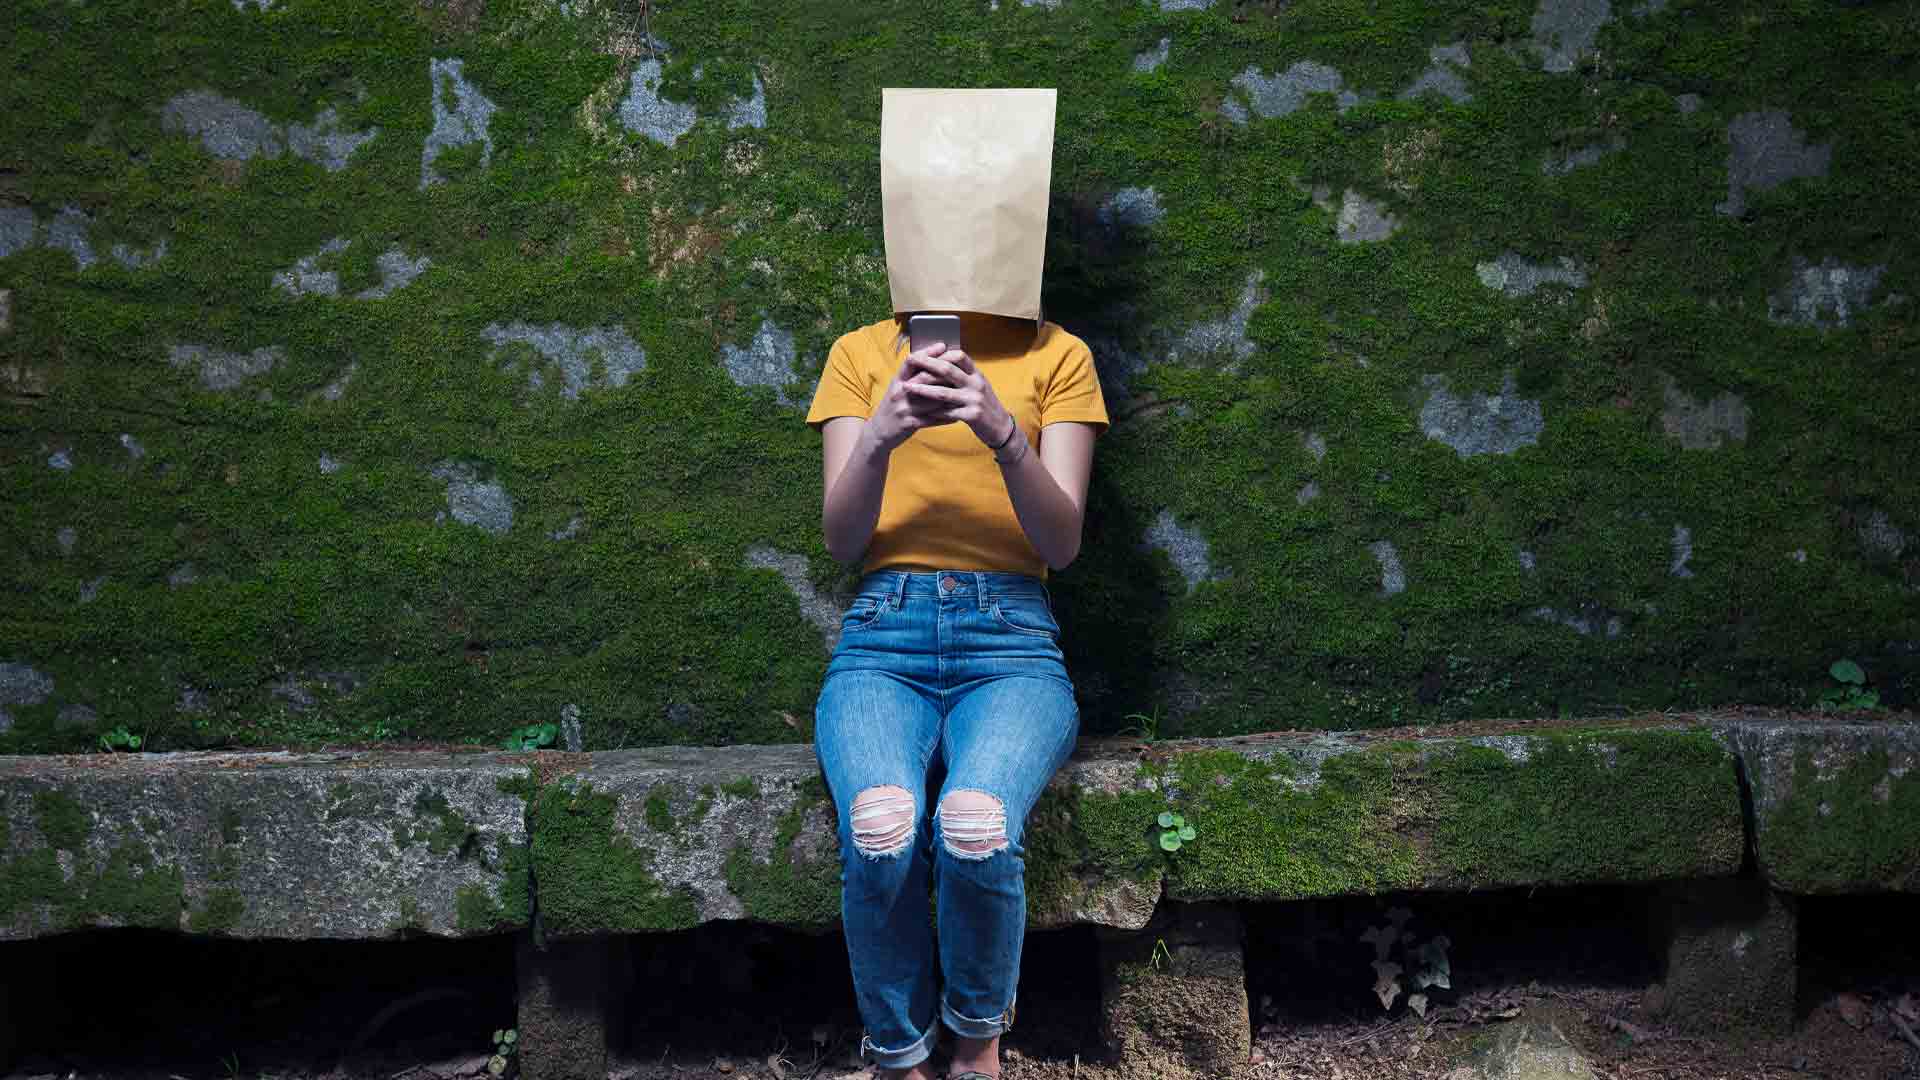 Embarassed person sitting with a paper bag over their head to hide their identity.